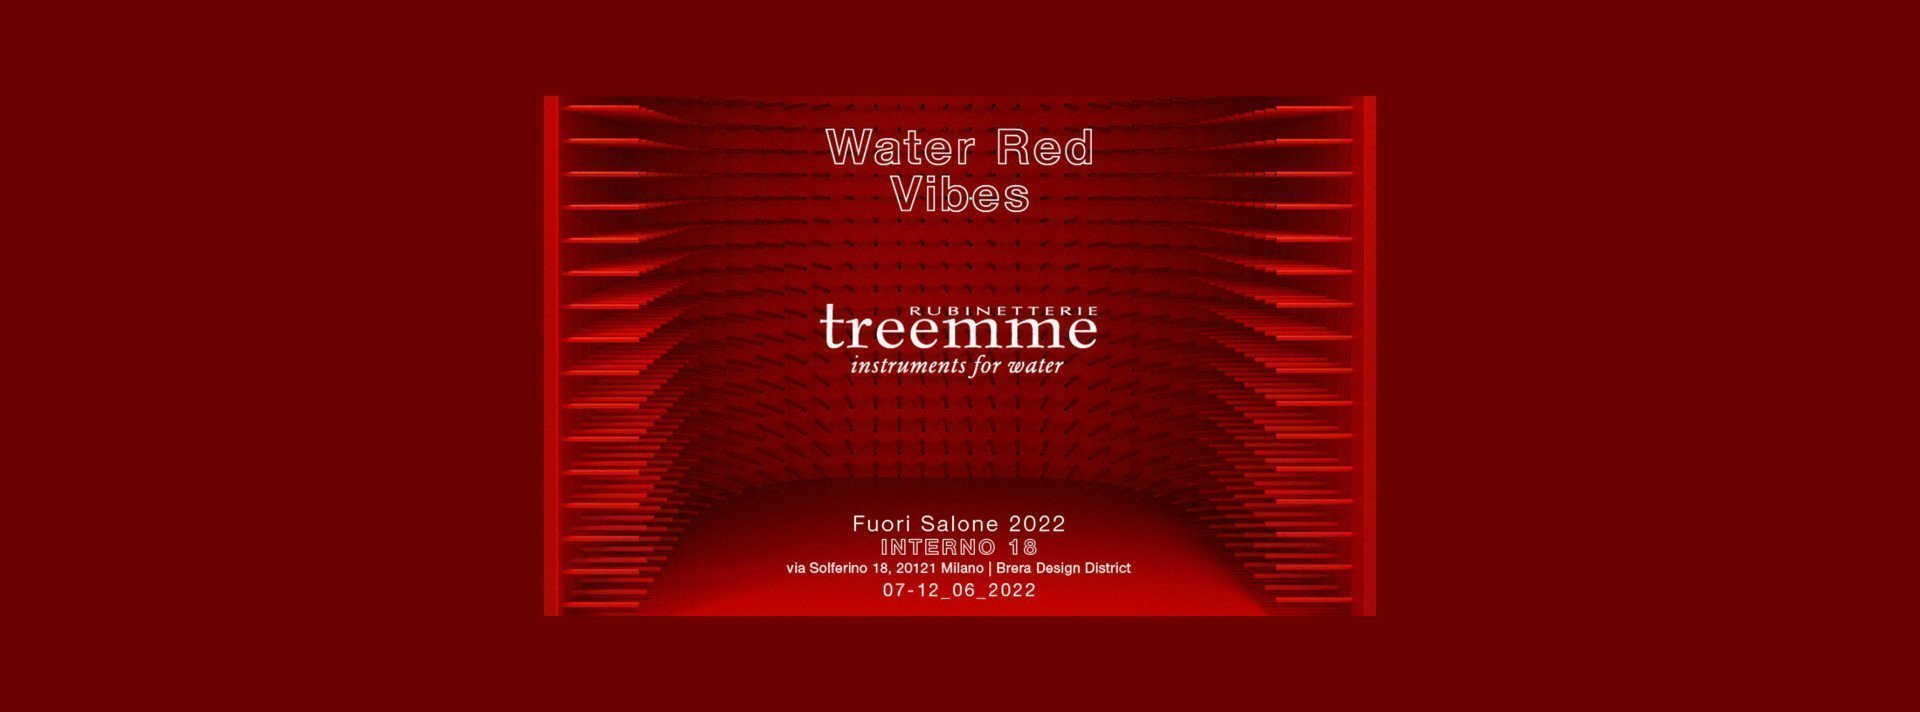 Water Red Vibes: the Rubinetterie Treemme event at the Milano Design Week 2022